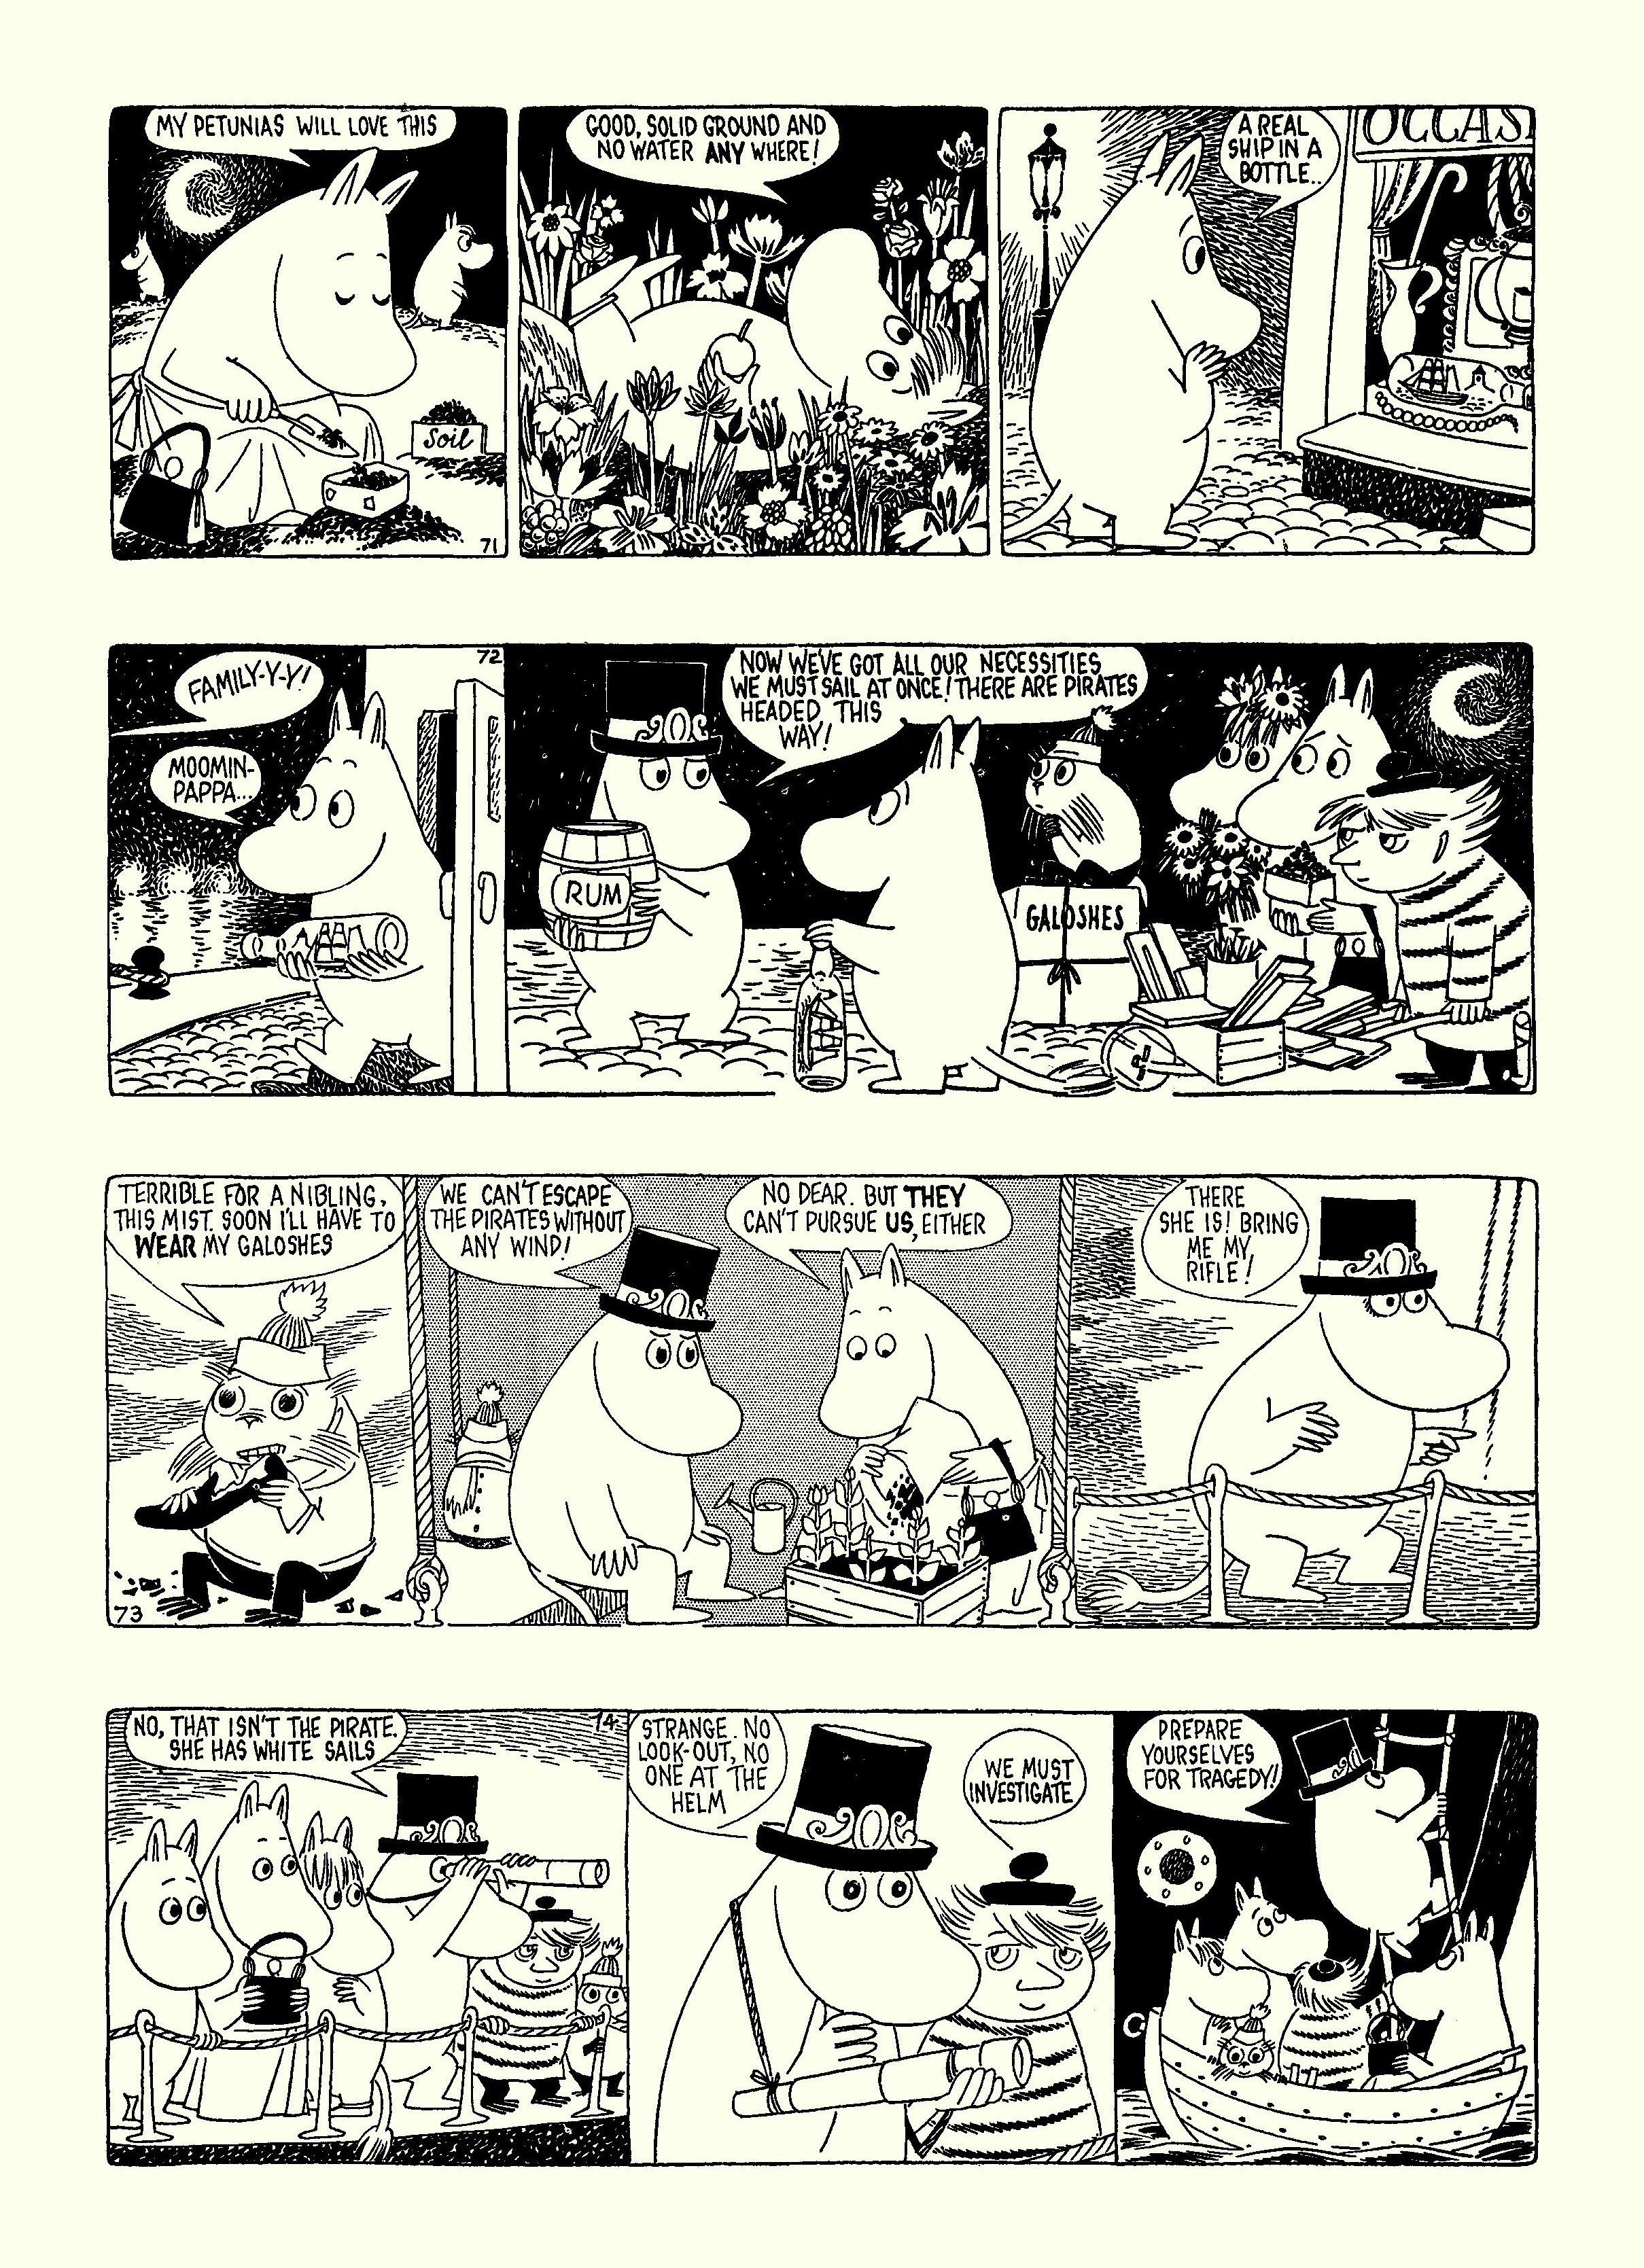 Read online Moomin: The Complete Tove Jansson Comic Strip comic -  Issue # TPB 5 - 49